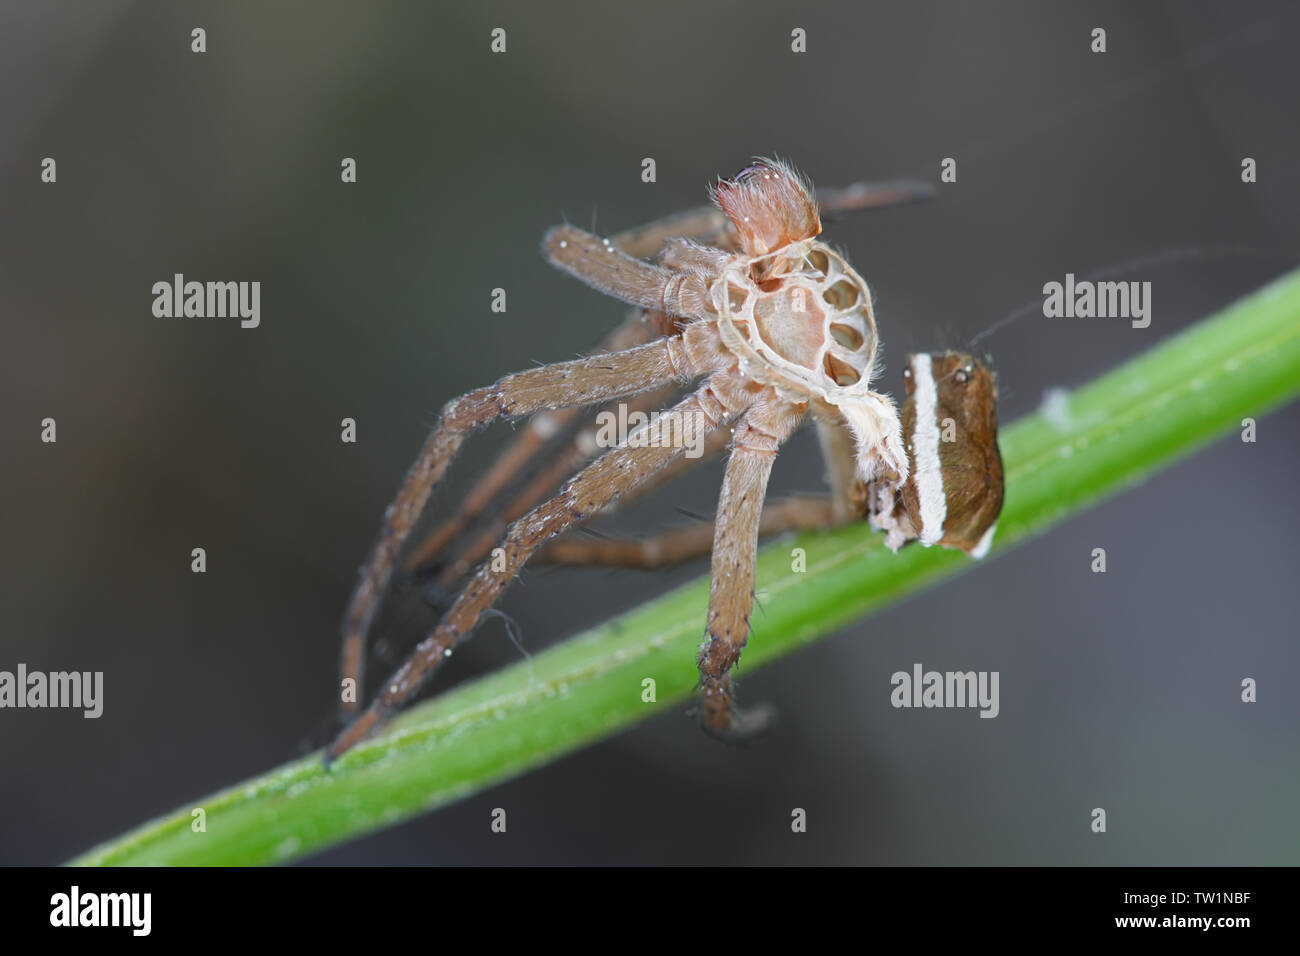 Shed skin of raft spider, Dolomedes fimbriatus Stock Photo